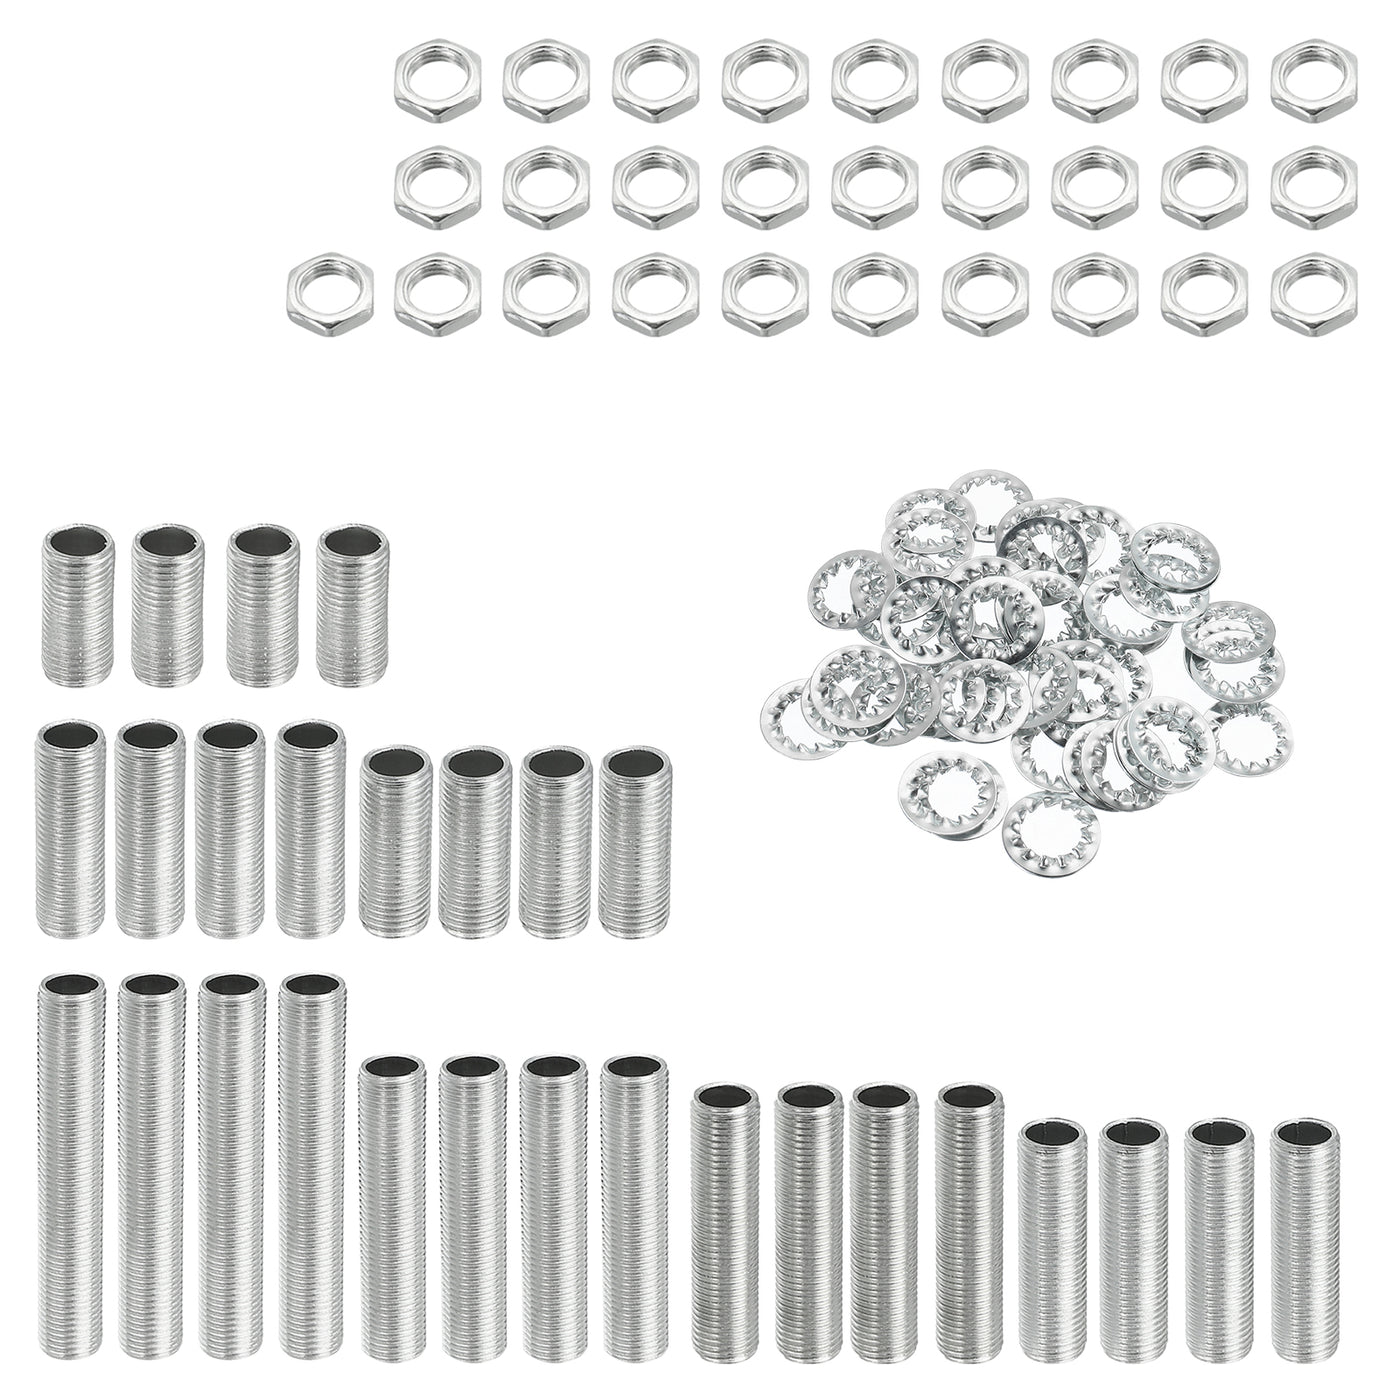 Harfington Lamp Pipe Kit with Lock Nuts Teeth Washers 1/8IP Thread Fasteners Assortment for Chandelier Ceiling Light Repair Assembly DIY Hardware, Pack of 84